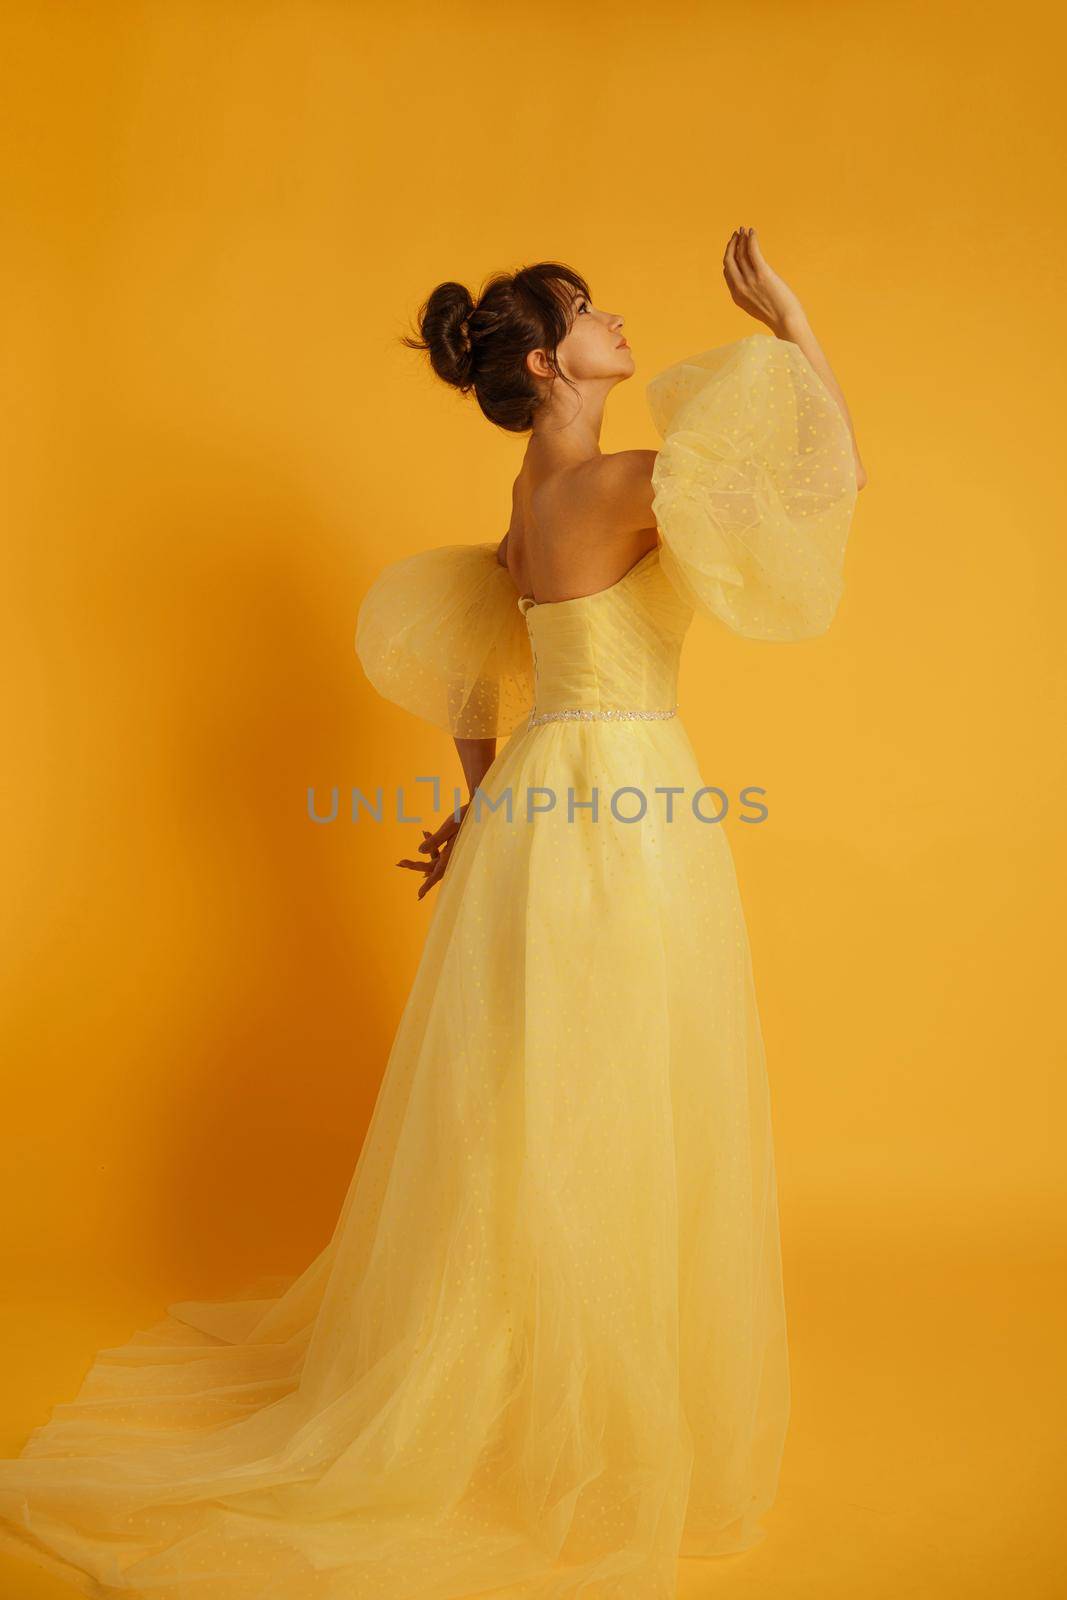 Profile portrait of a beautiful middle-aged woman in a yellow dress, her hair pulled up against a yellow background.